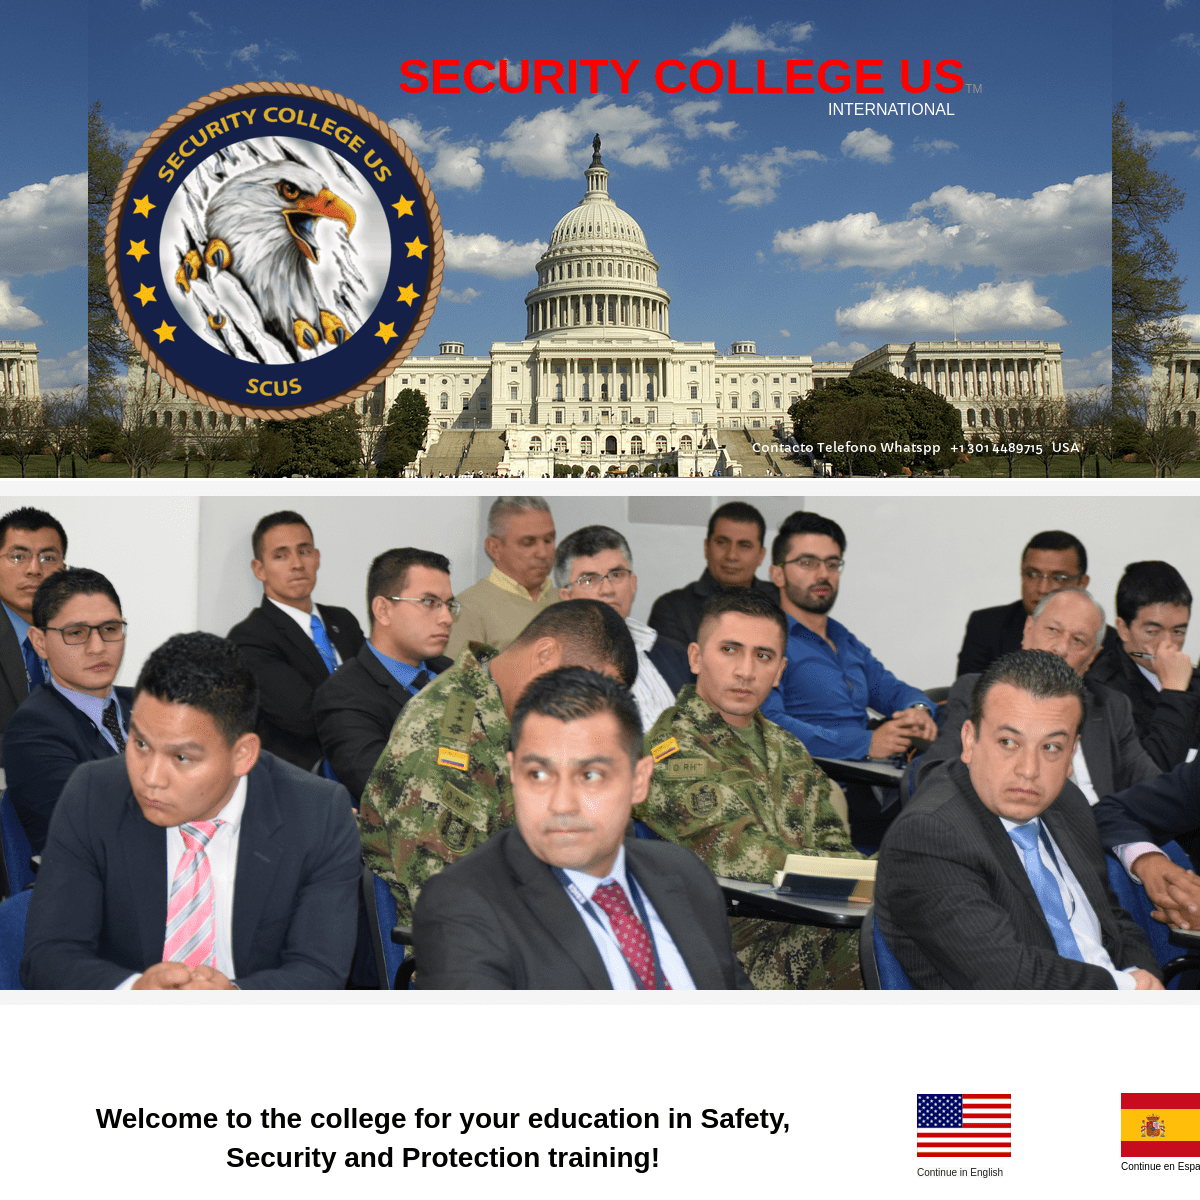 A complete backup of securitycollege.us